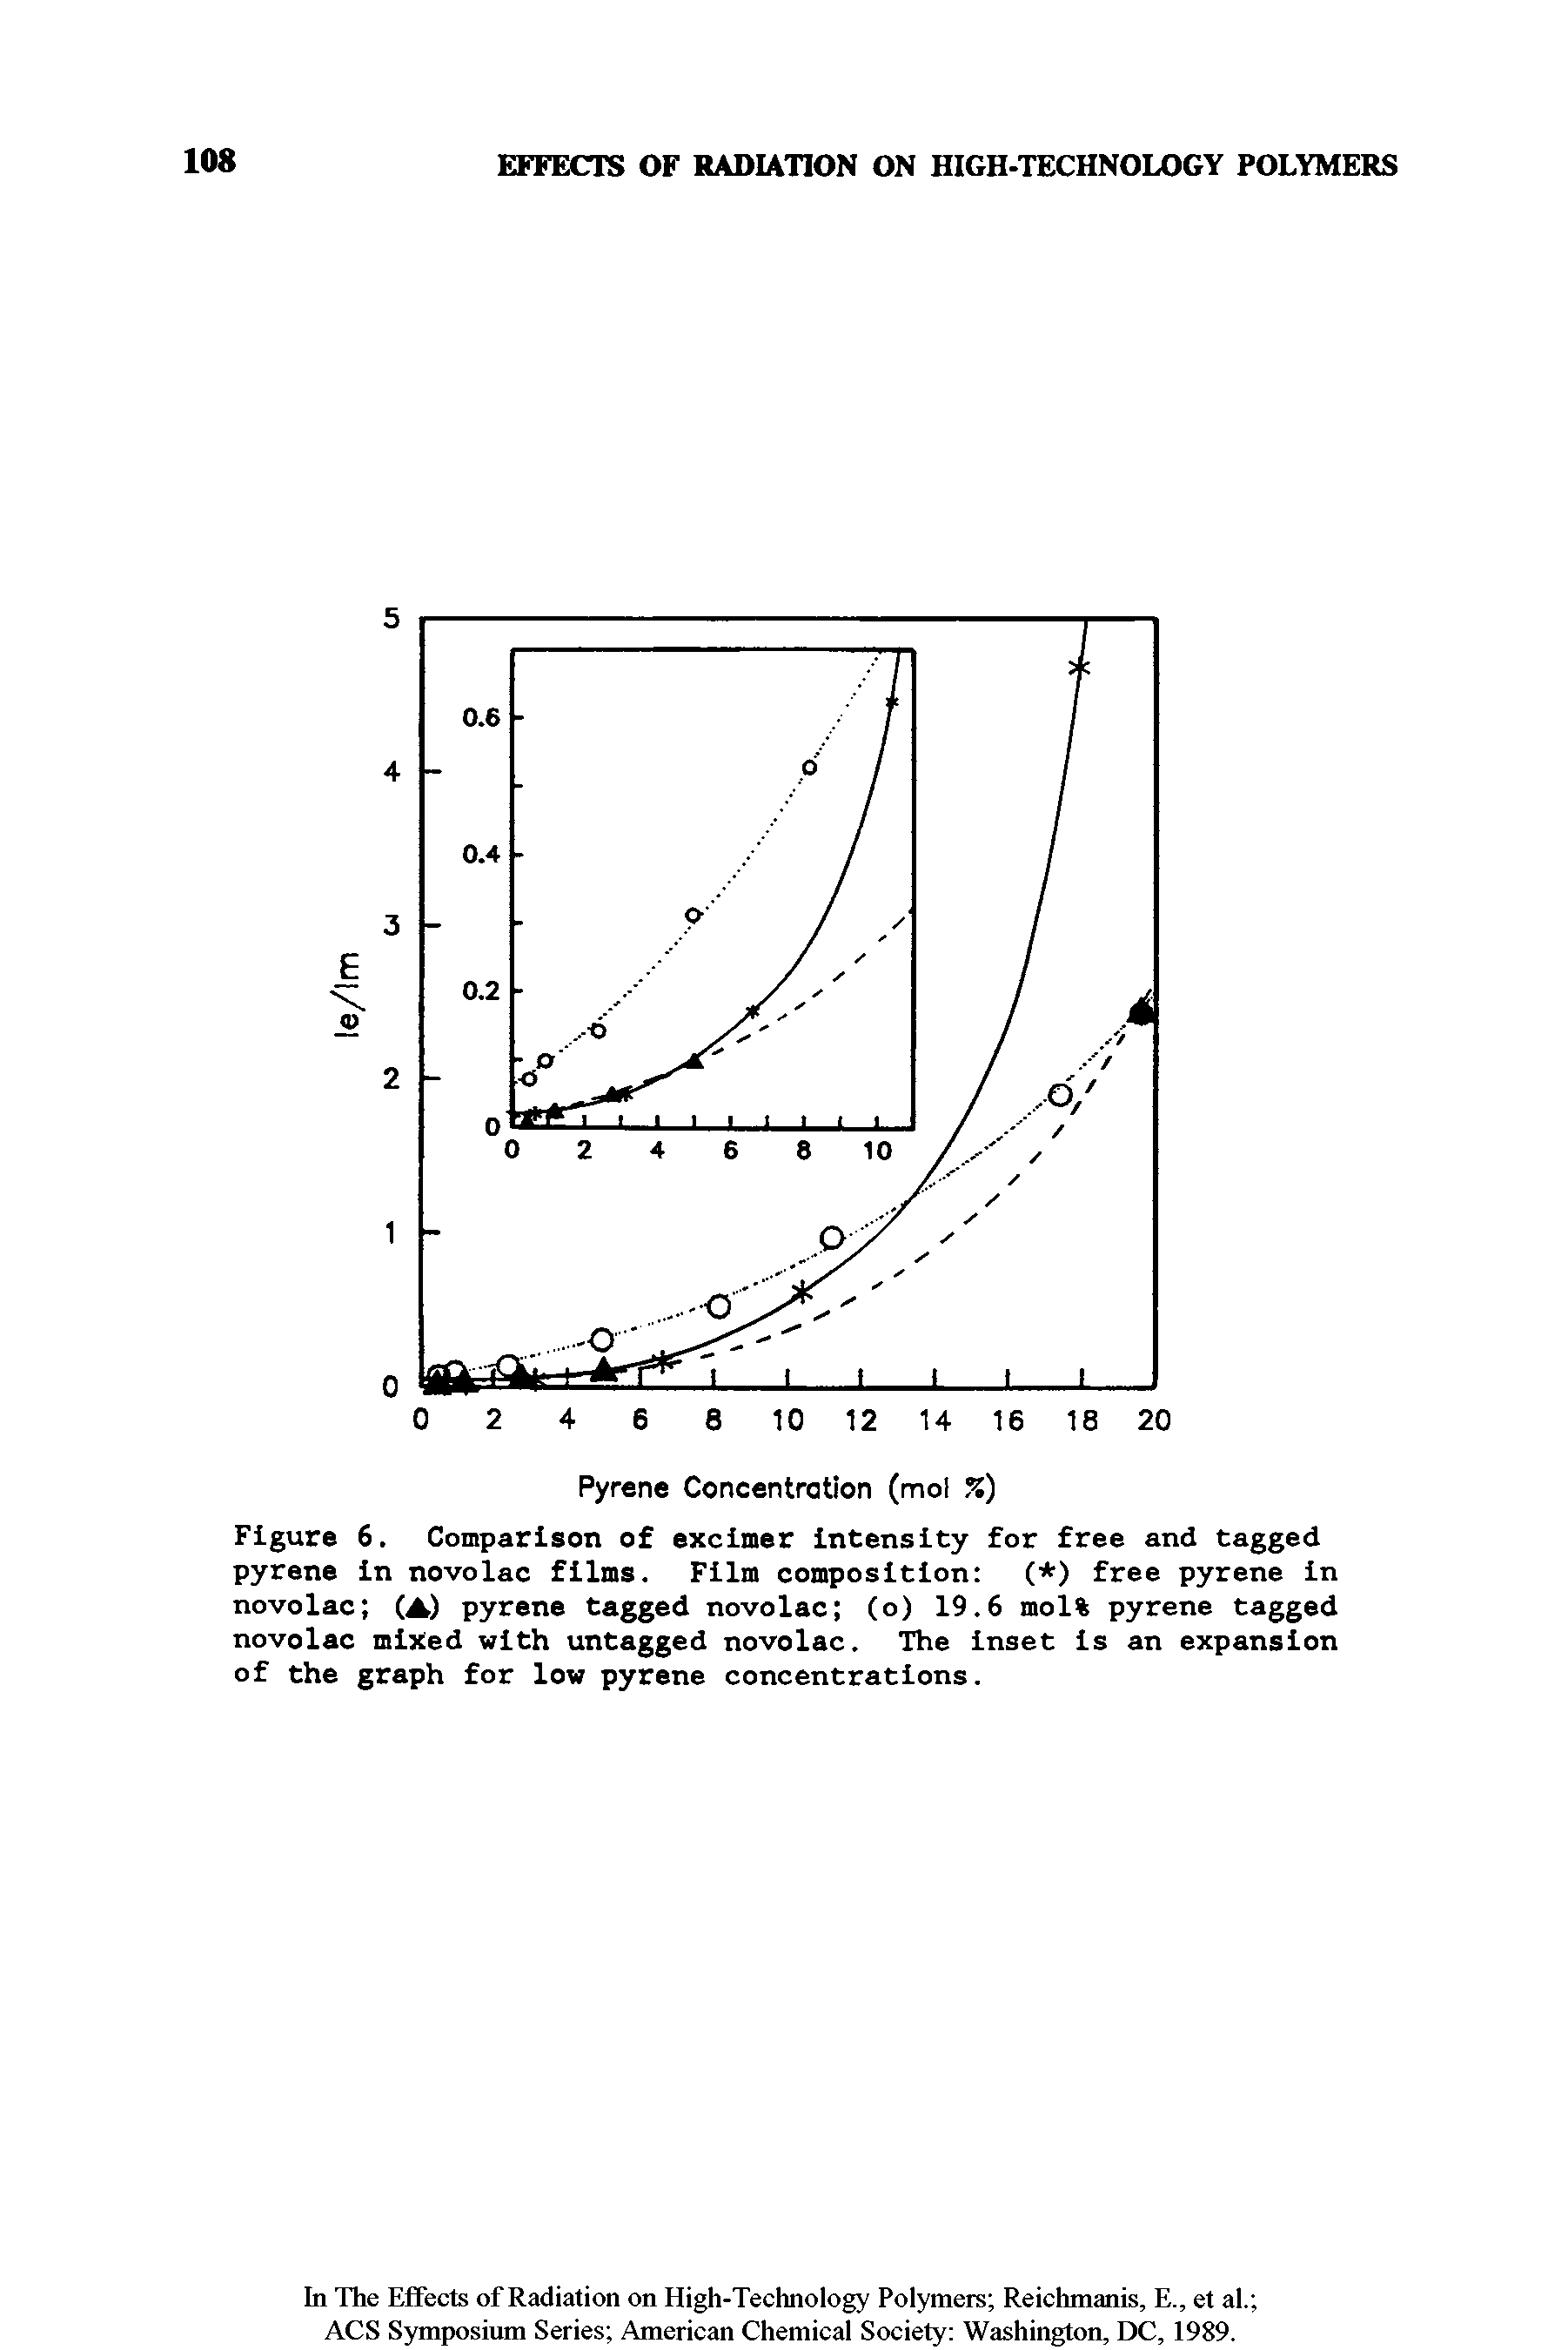 Figure 6. Comparison of excimer intensity for free and tagged pyrene in novolac films. Film composition ( ) free pyrene in novolac (A) pyrene tagged novolac (o) 19.6 mol% pyrene tagged novolac mixed with untagged novolac. The inset is an expansion of the graph for low pyrene concentrations.